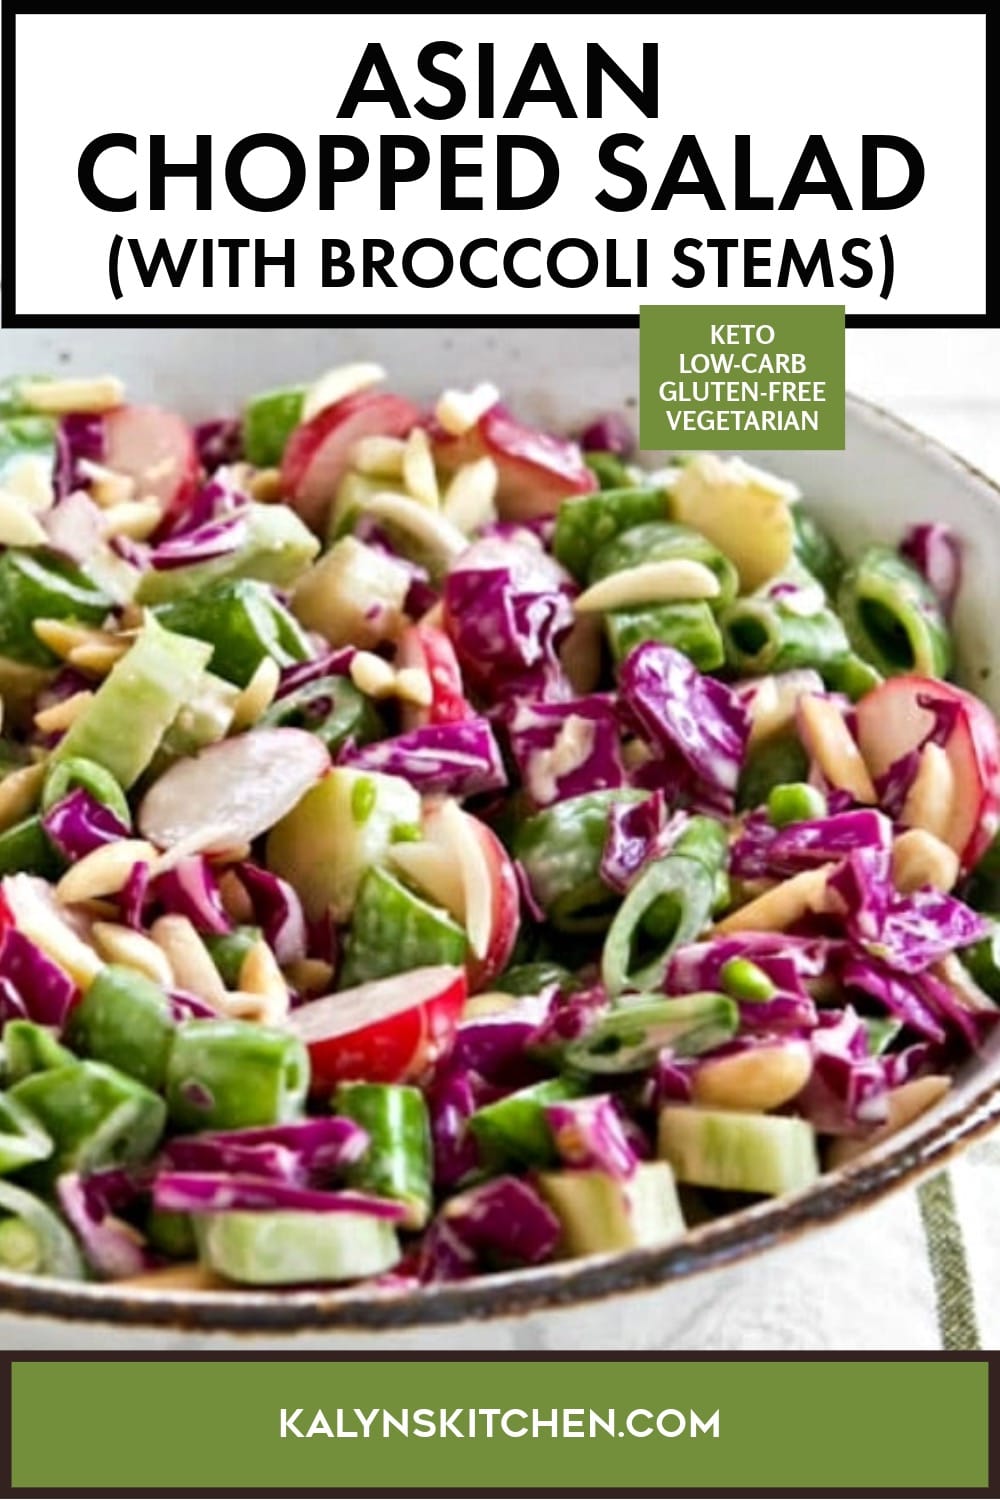 Pinterest image of Asian Chopped Salad (with Broccoli Stems)